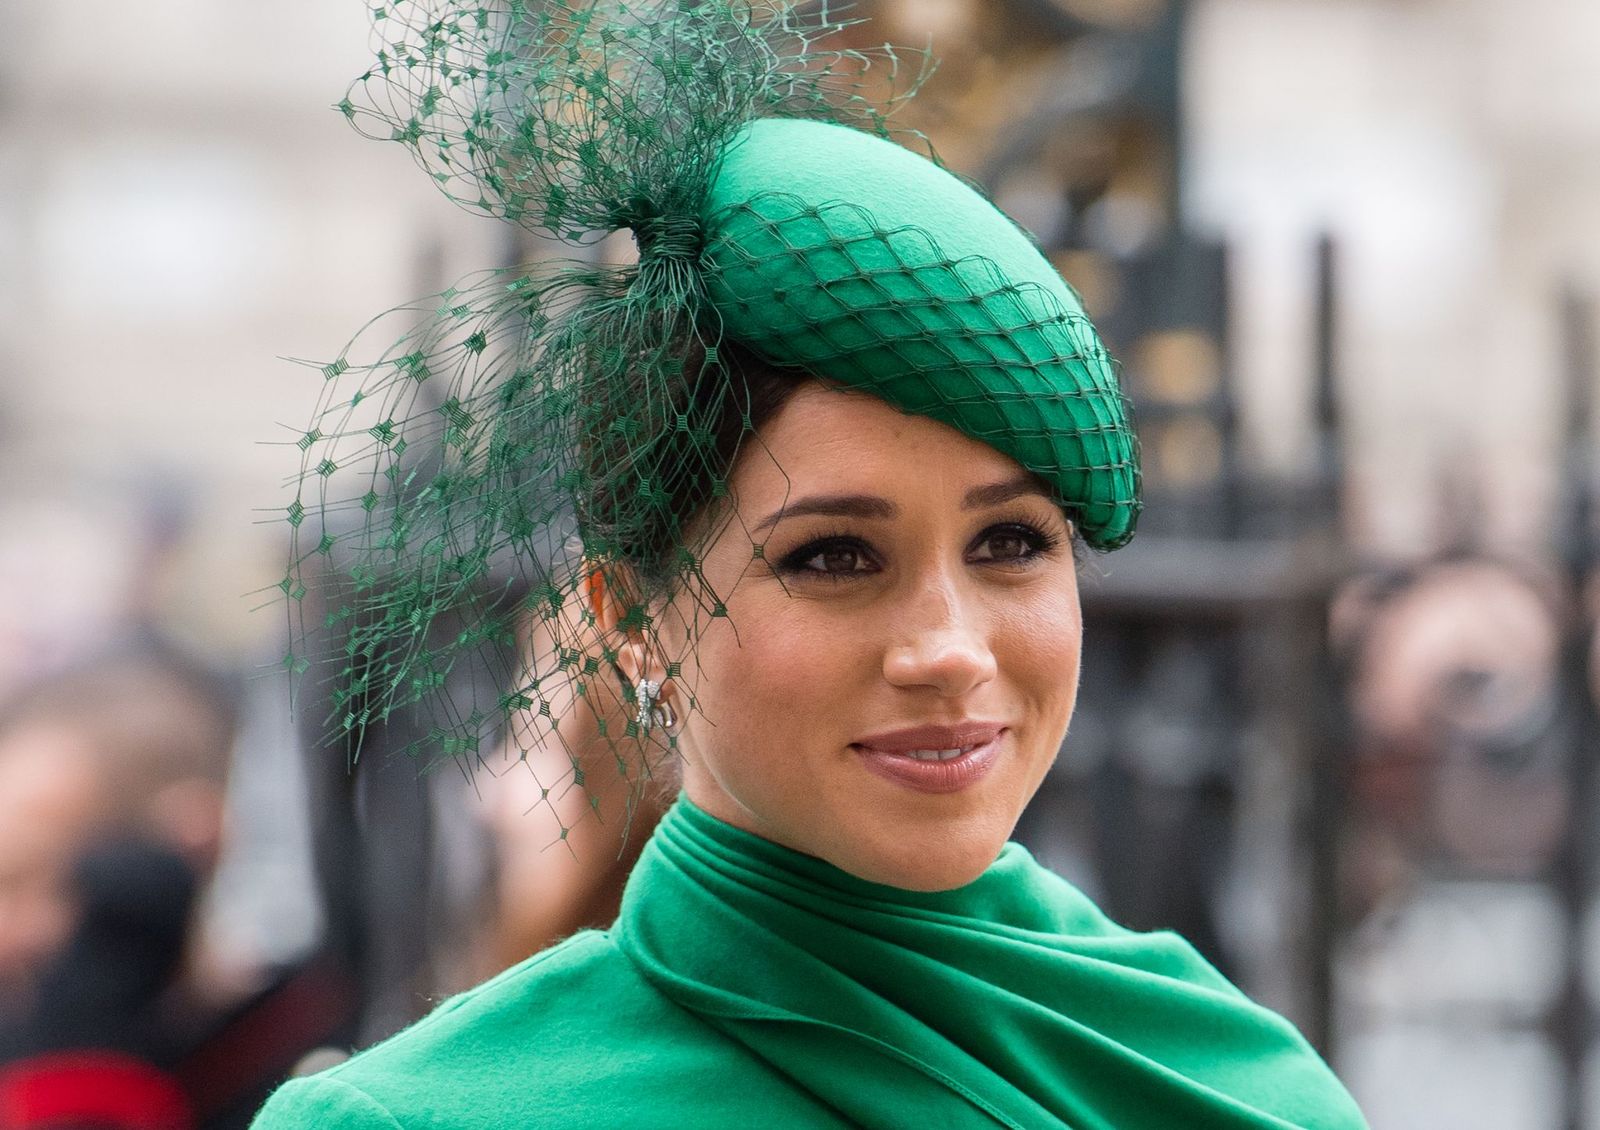 Meghan Markle at the Commonwealth Day Service 2020 on March 09, 2020 | Getty Images